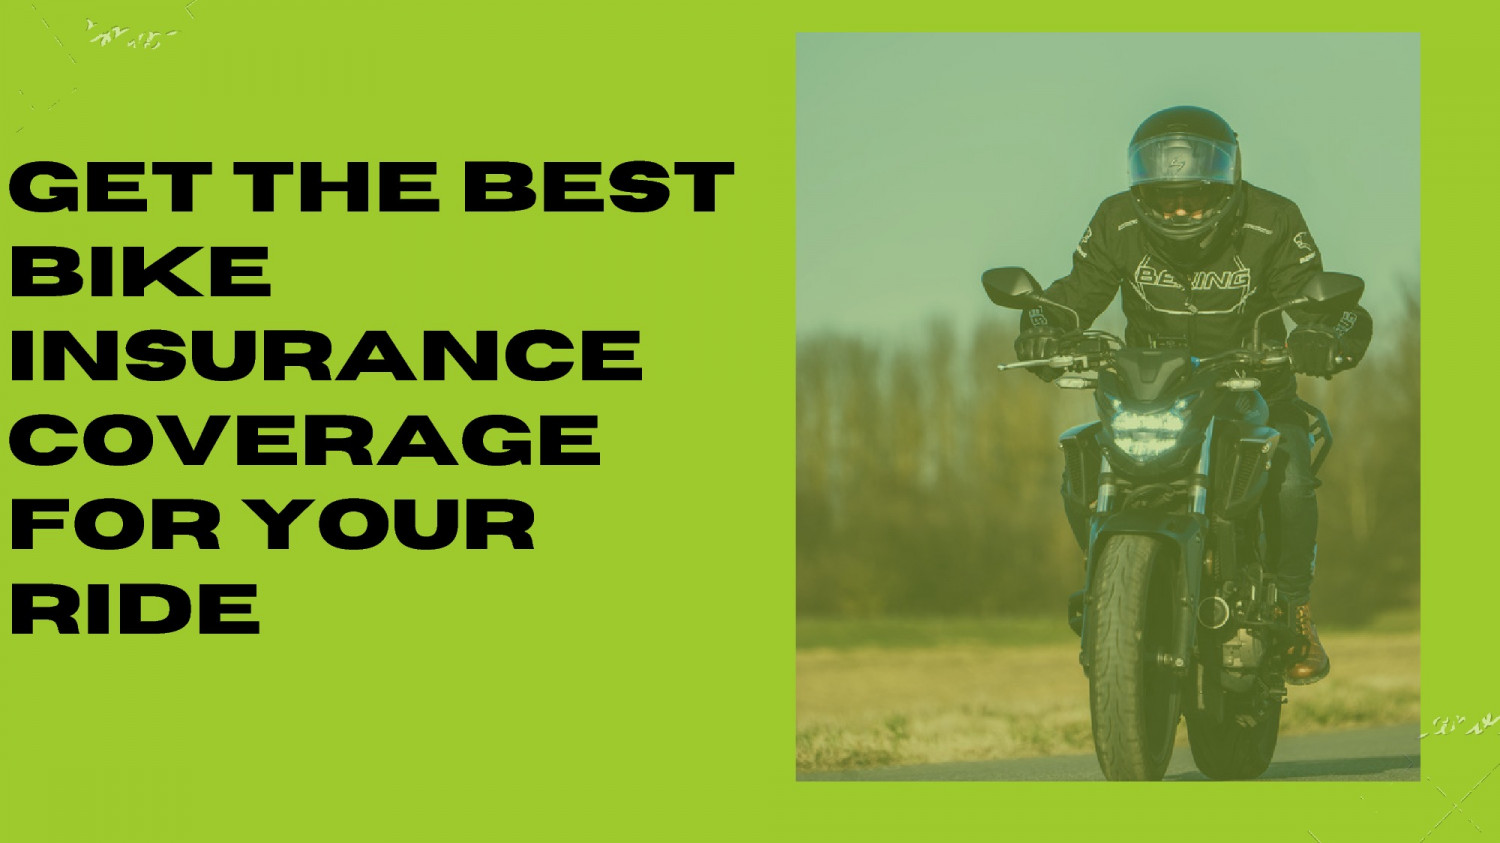 Get the Best Bike Insurance Coverage for Your Ride Infographic